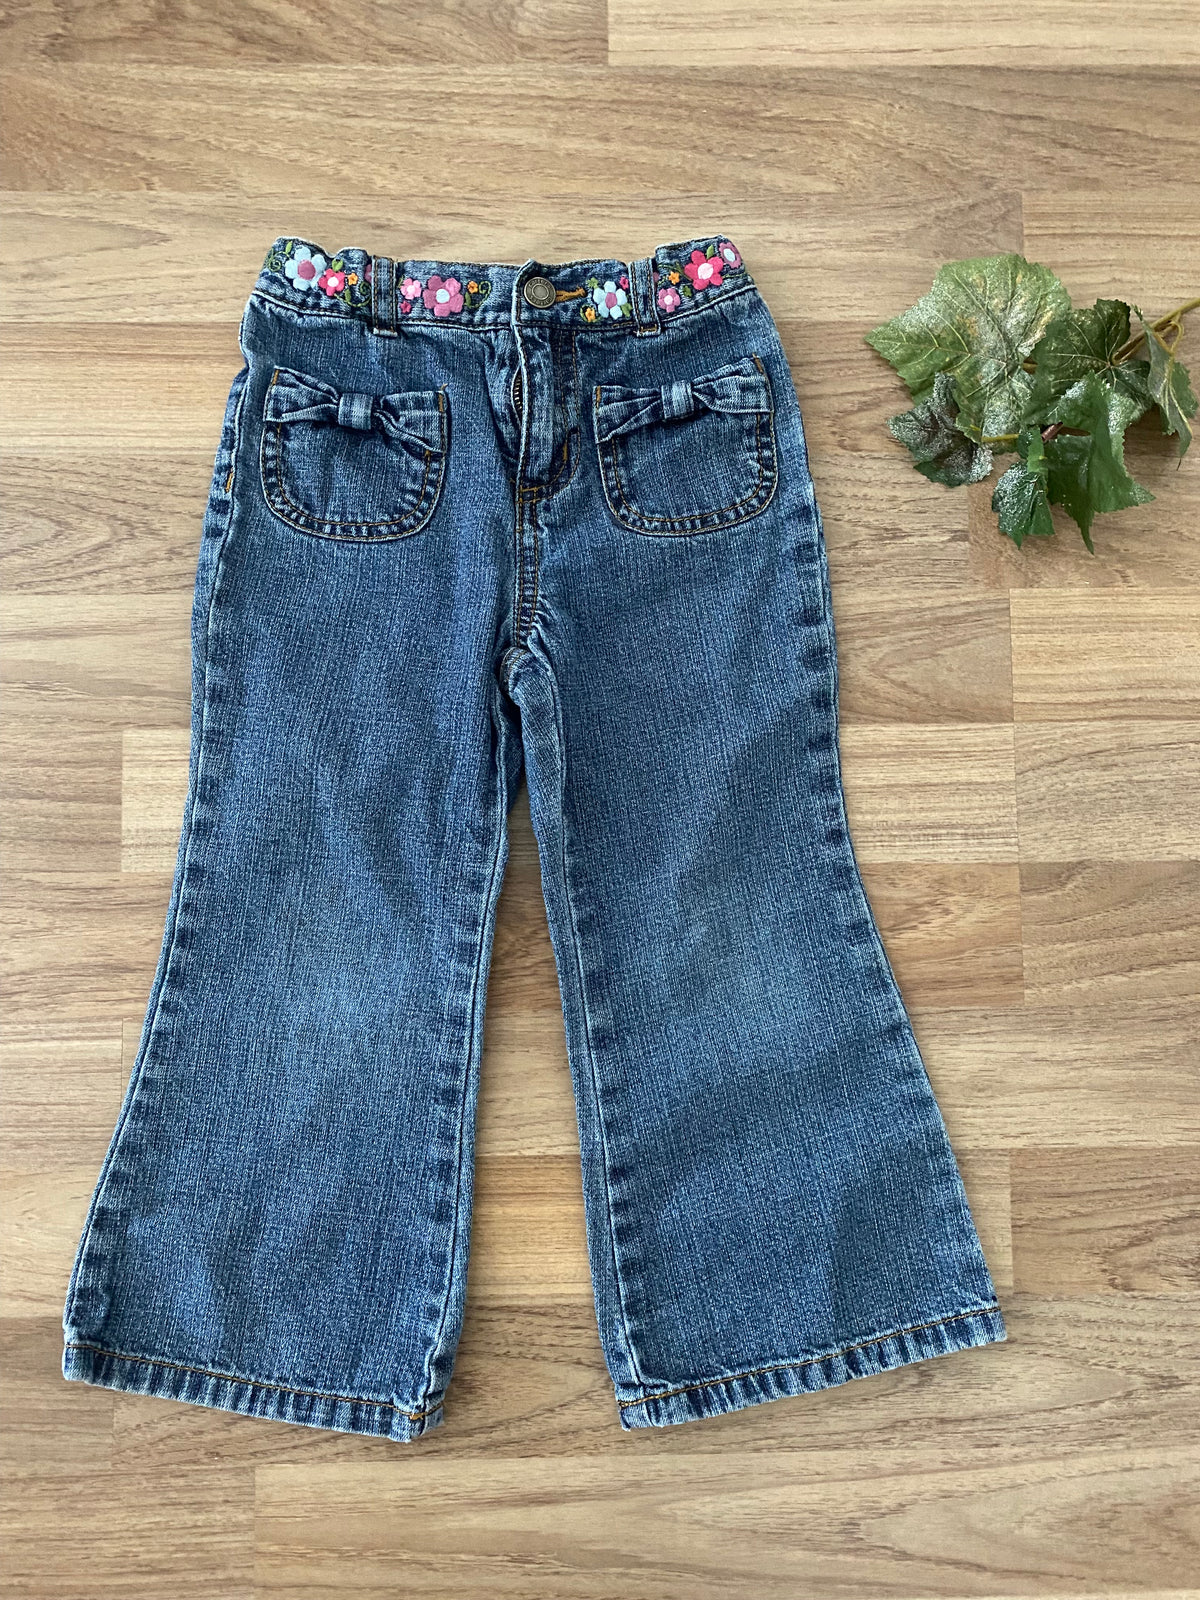 Jeans (Girls Size 3)